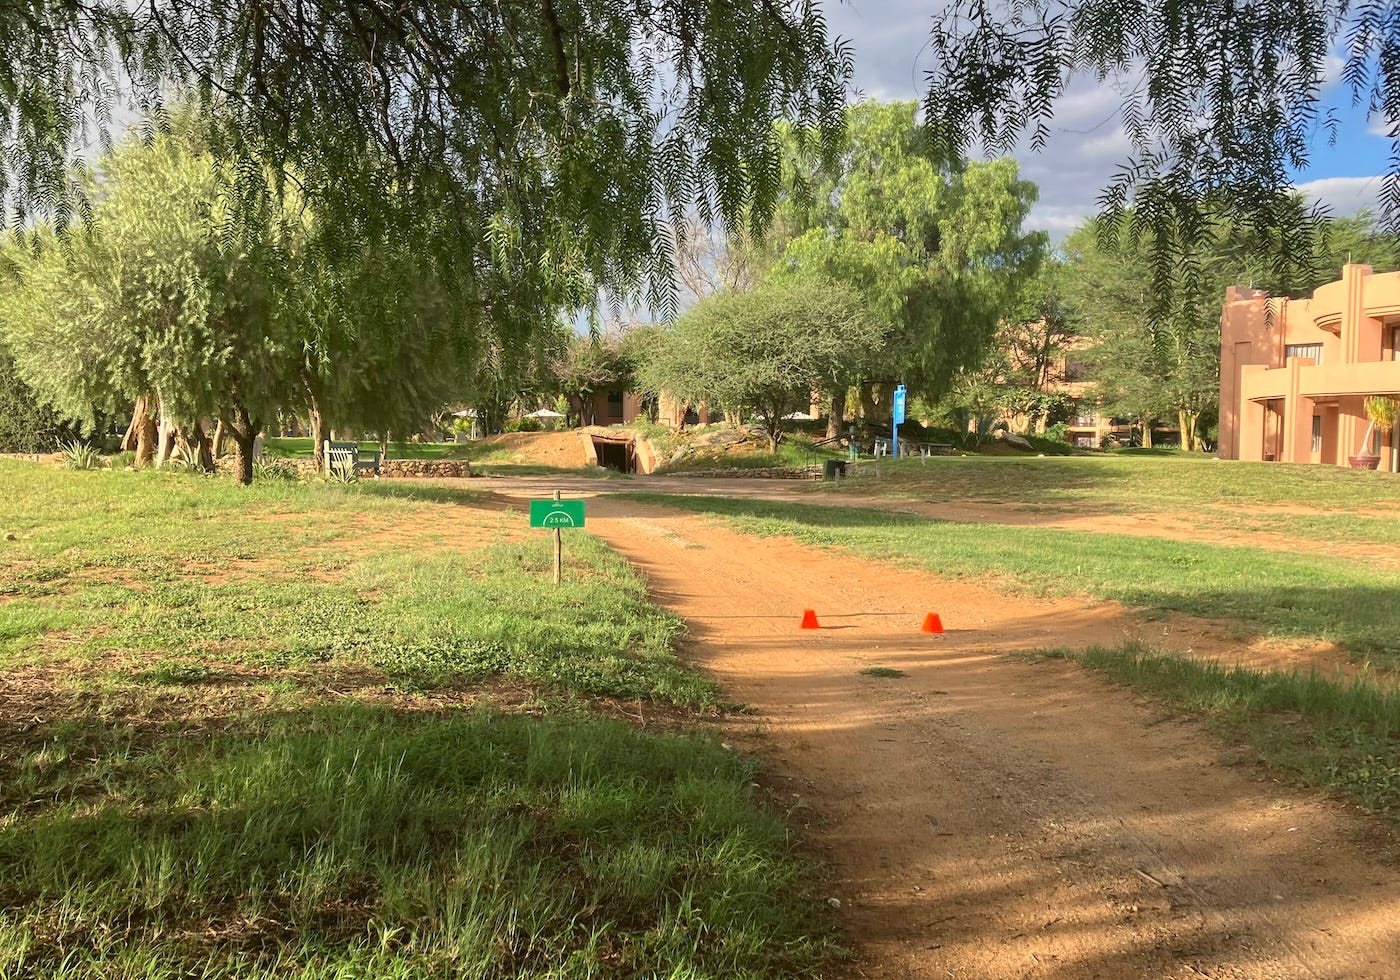 Two cones and a sign mark the turnaround point on the path